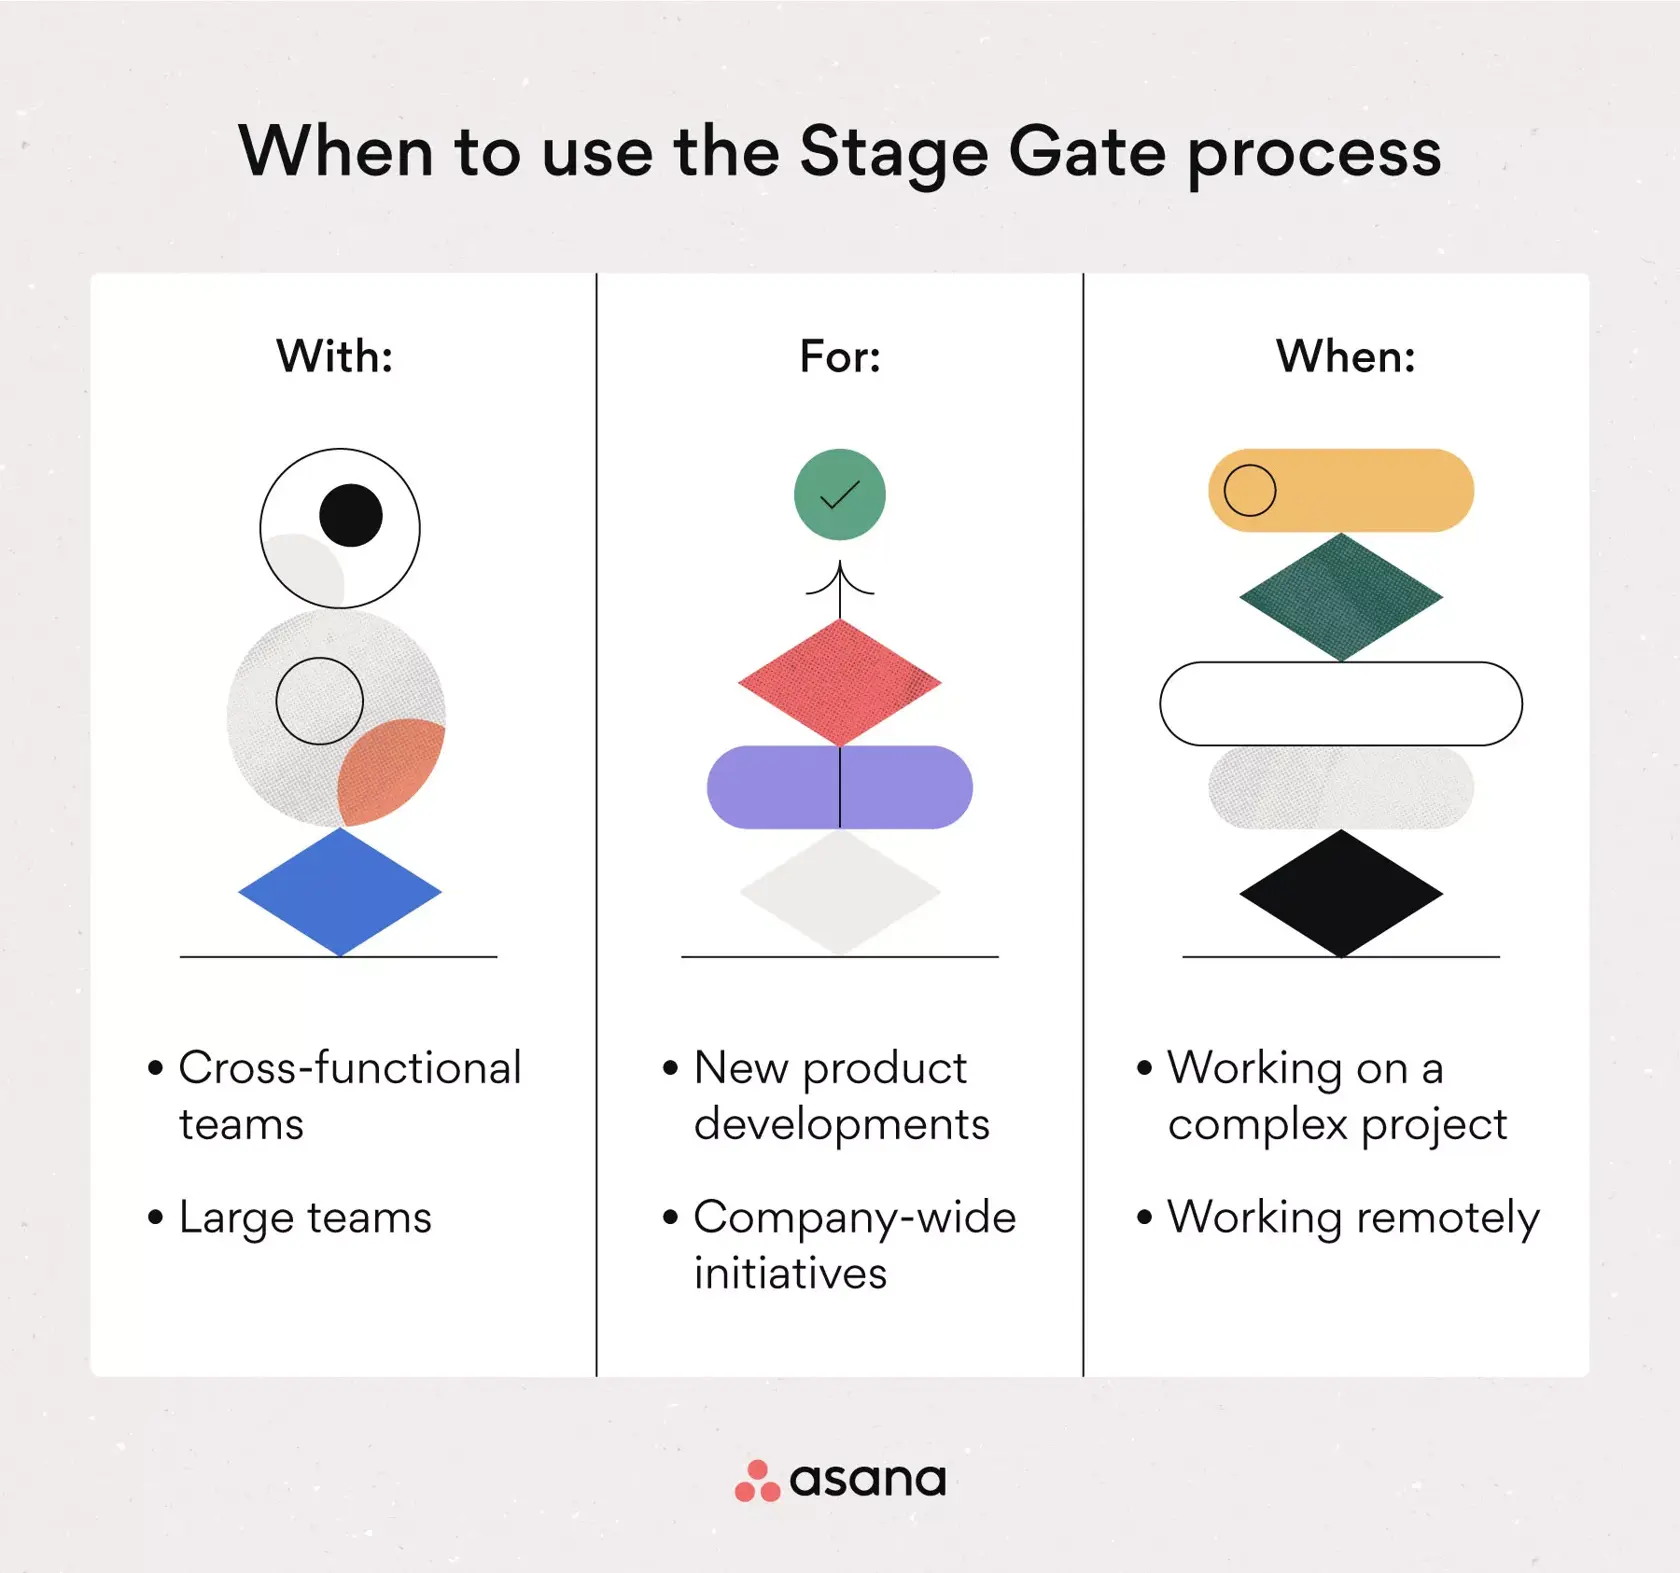 [inline illustration] When to use the Stage Gate process (infographic)